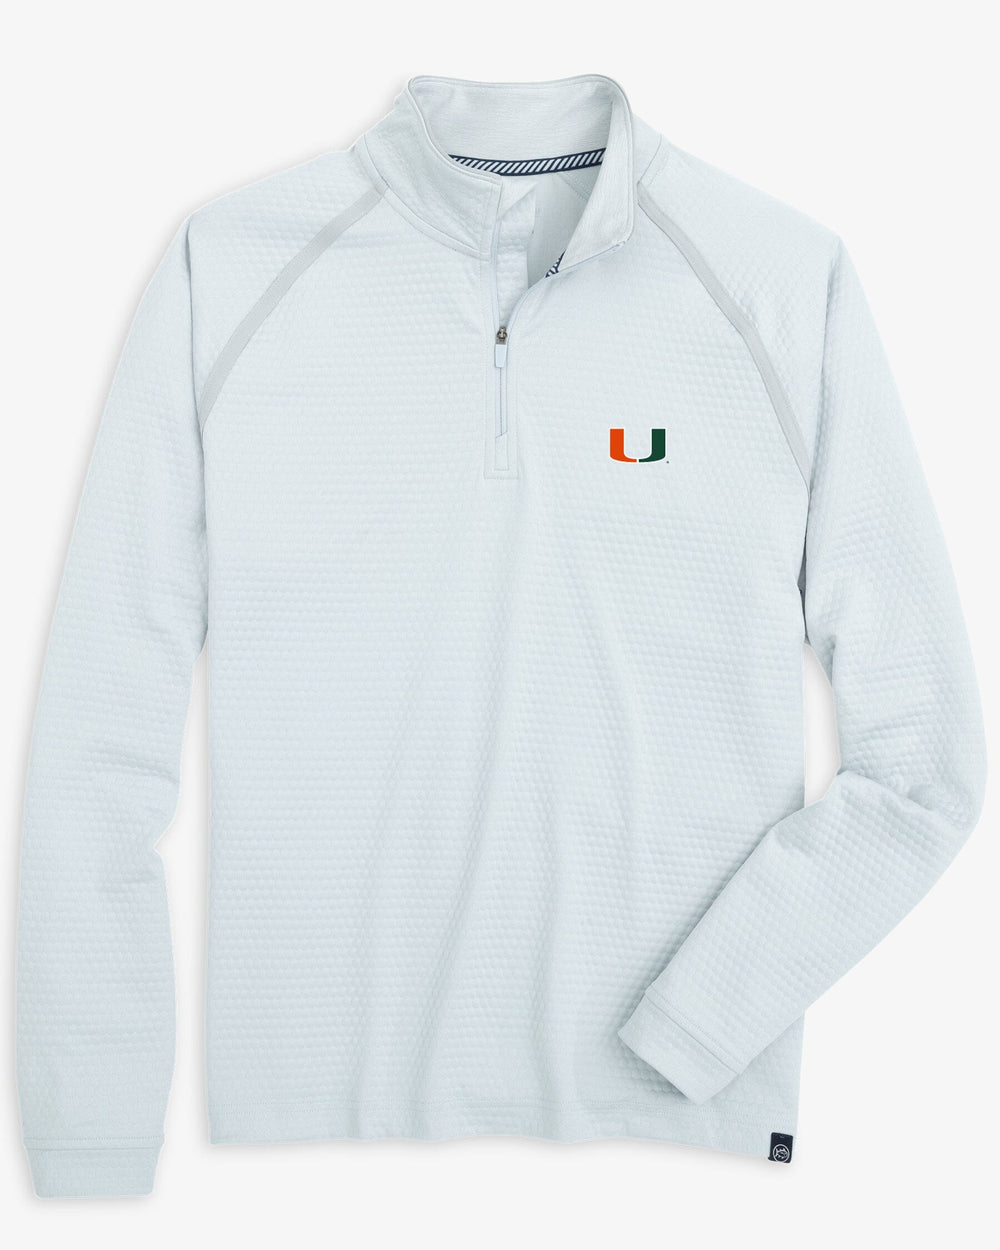 The front view of the Miami Hurricanes Scuttle Heather Quarter Zip by Southern Tide - Heather Slate Grey